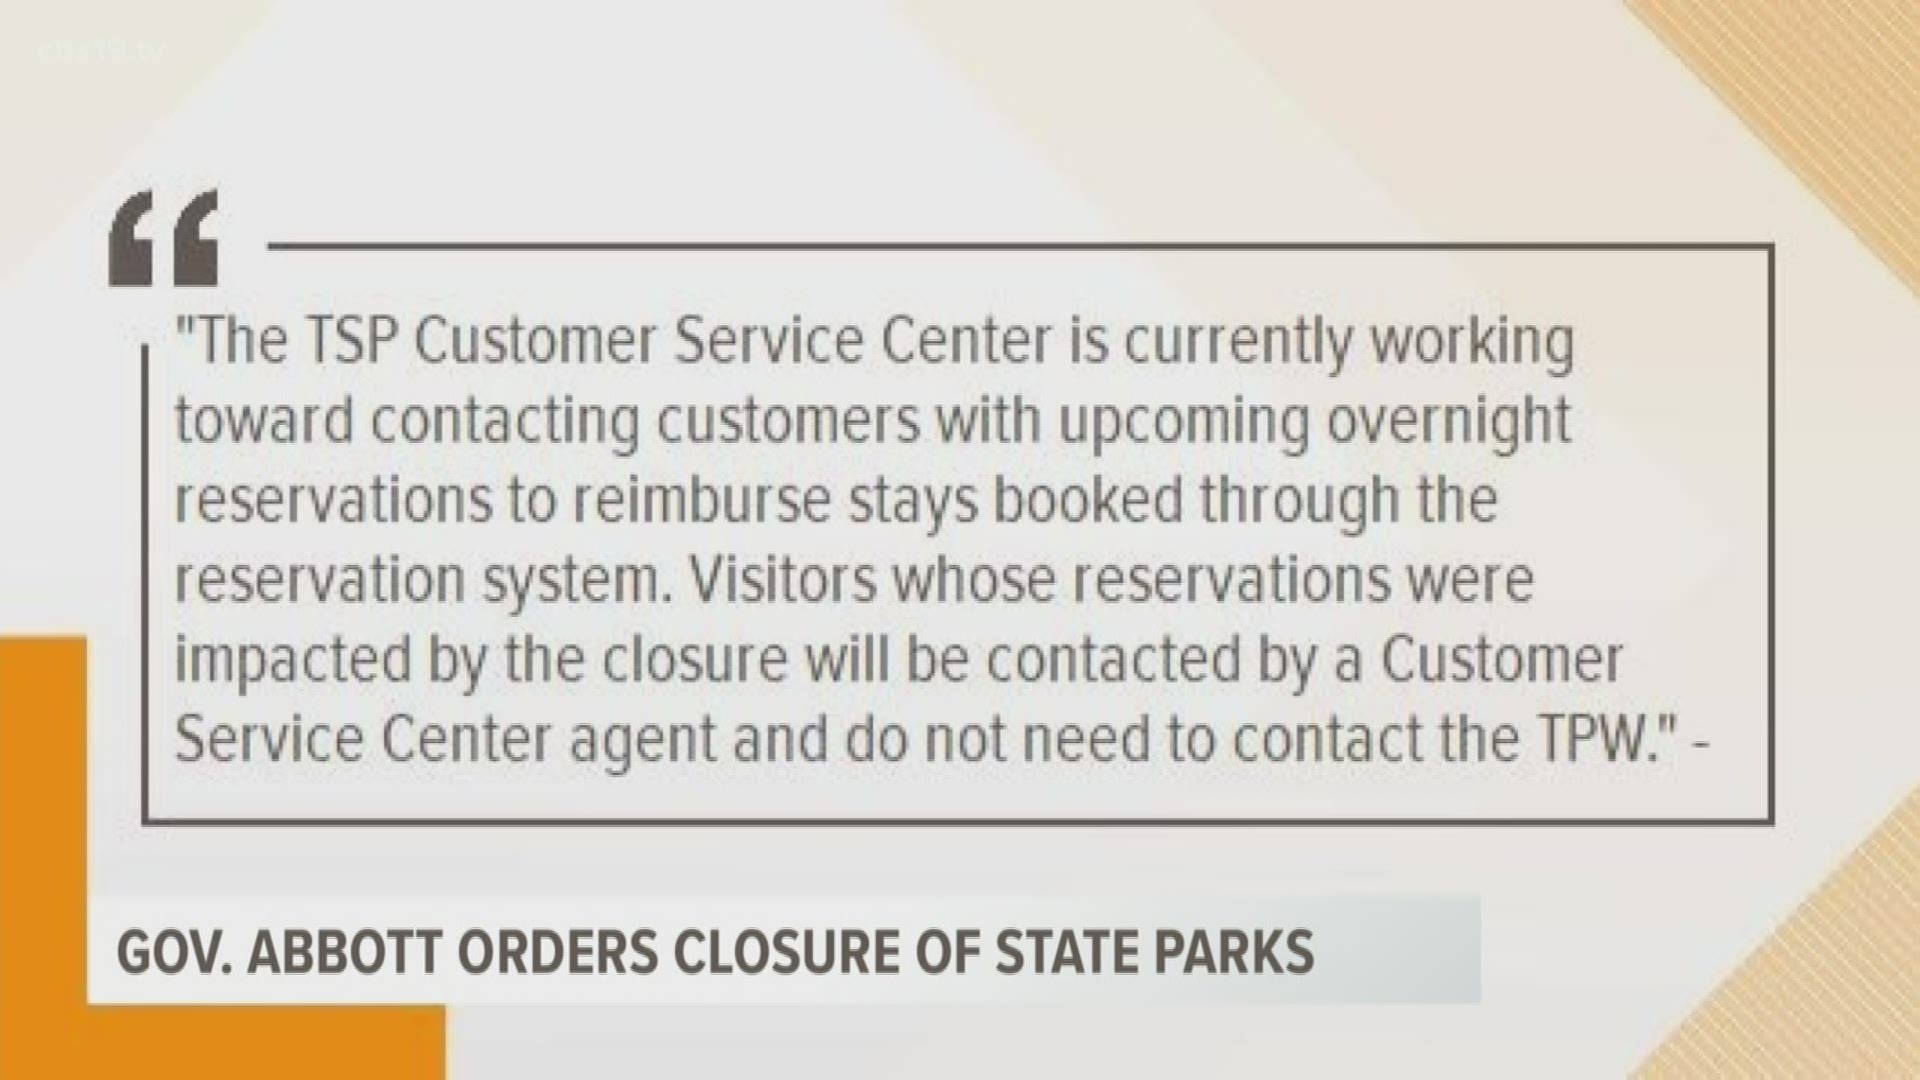 At the direction of Gov. Greg Abbott, Texas State Parks will be closed to the public effective at the close of business Tuesday, April 7.